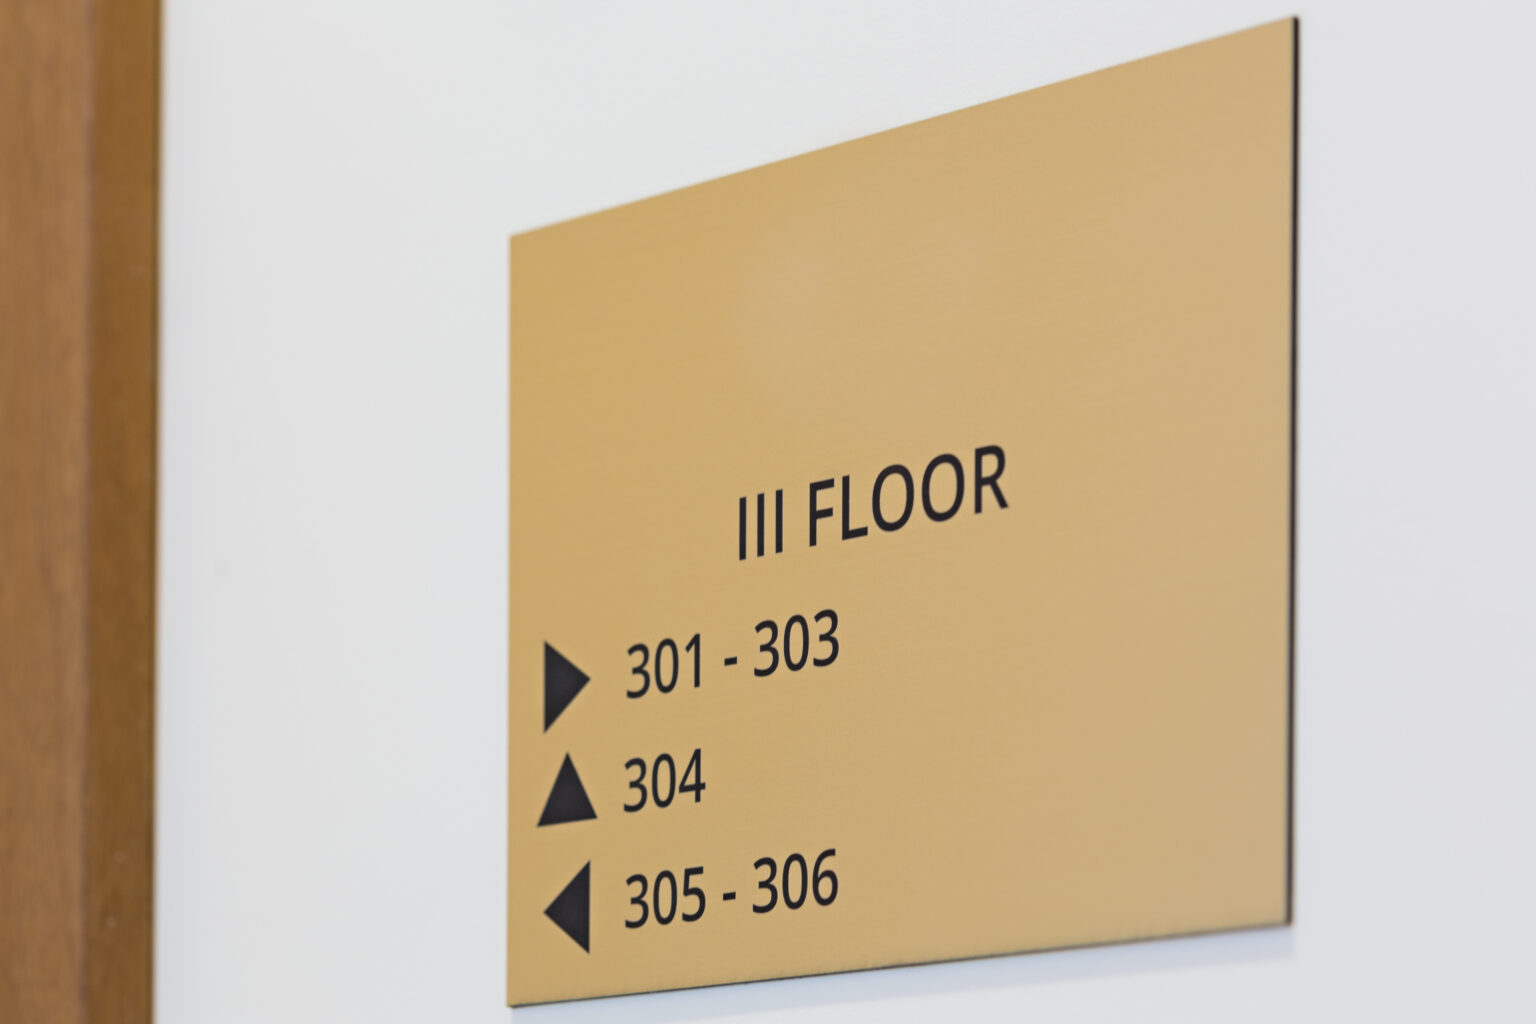 A yellow sign that has directions for the third floor, indicating where the room numbers are, with arrows.